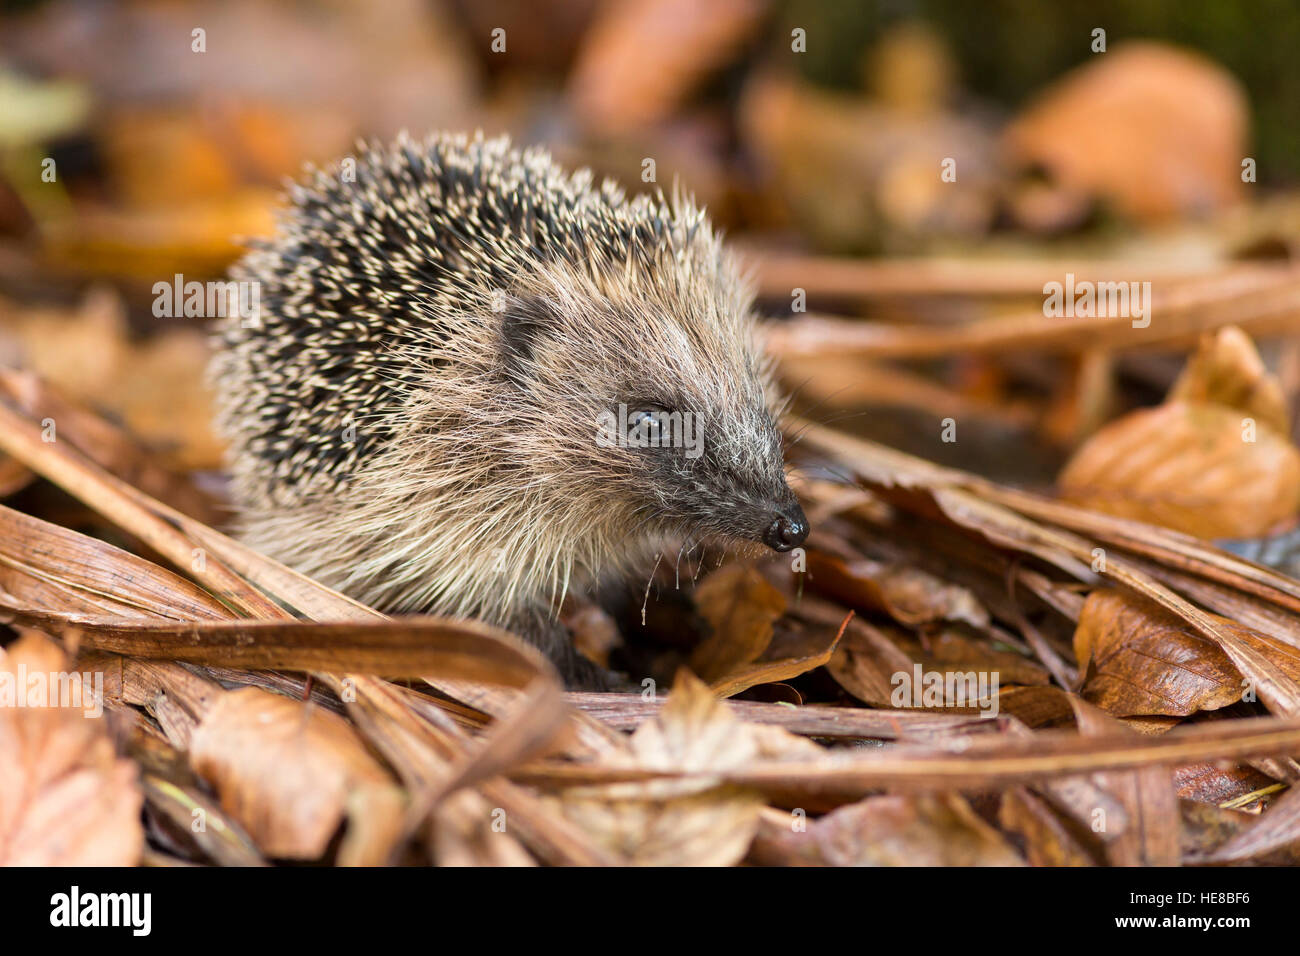 young juvenile hedgehog in autumn leaf litter Stock Photo